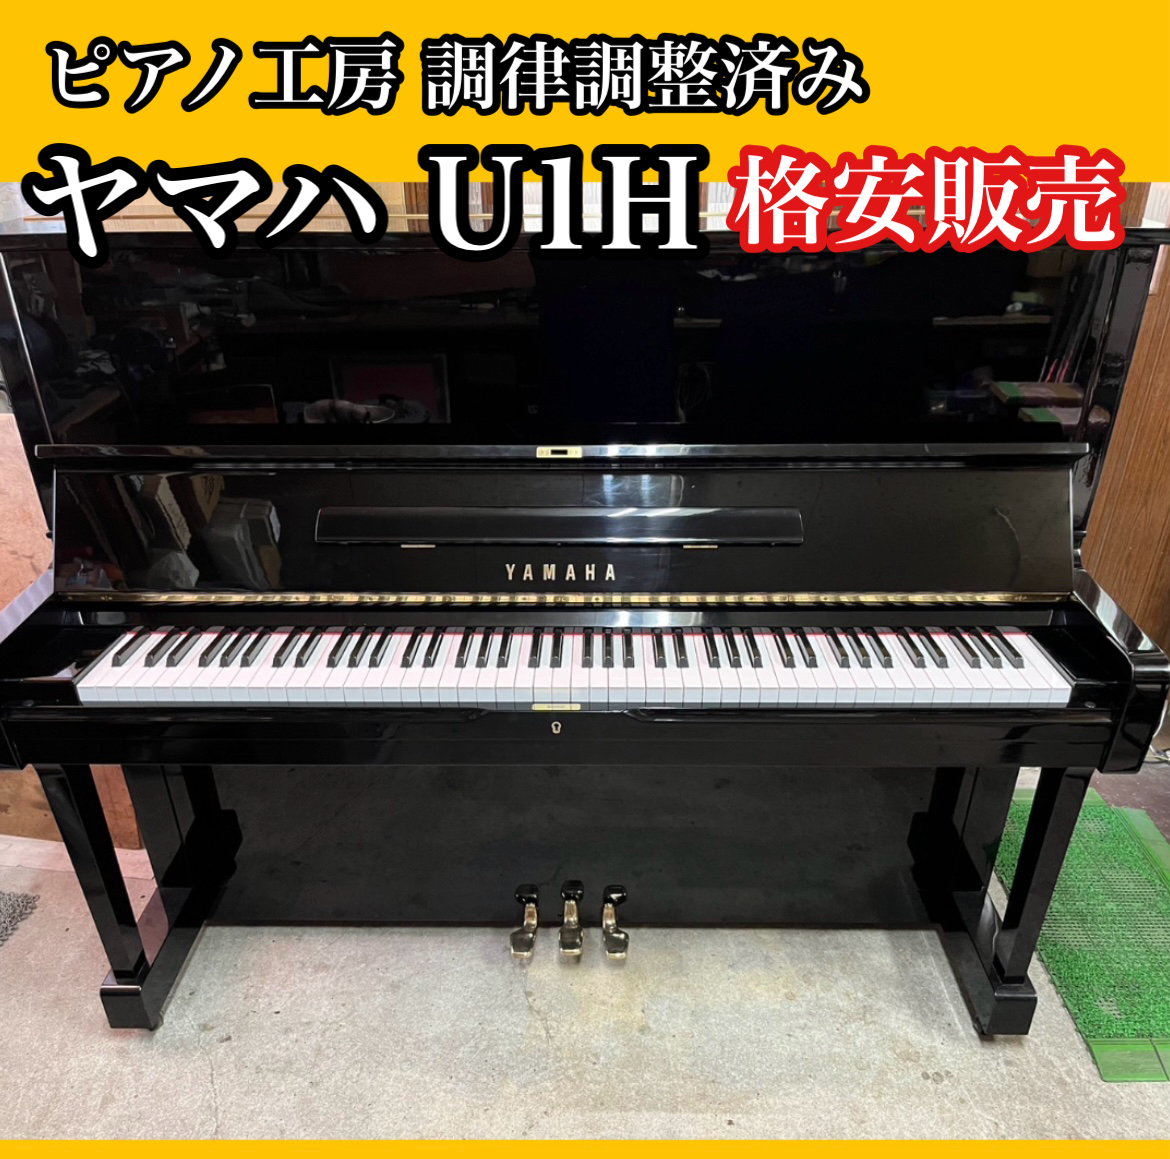  style law .. from the shop # first come, first served # Yamaha YAMAHA U1H upright piano used piano repairs ending safety condition excellent popular model 